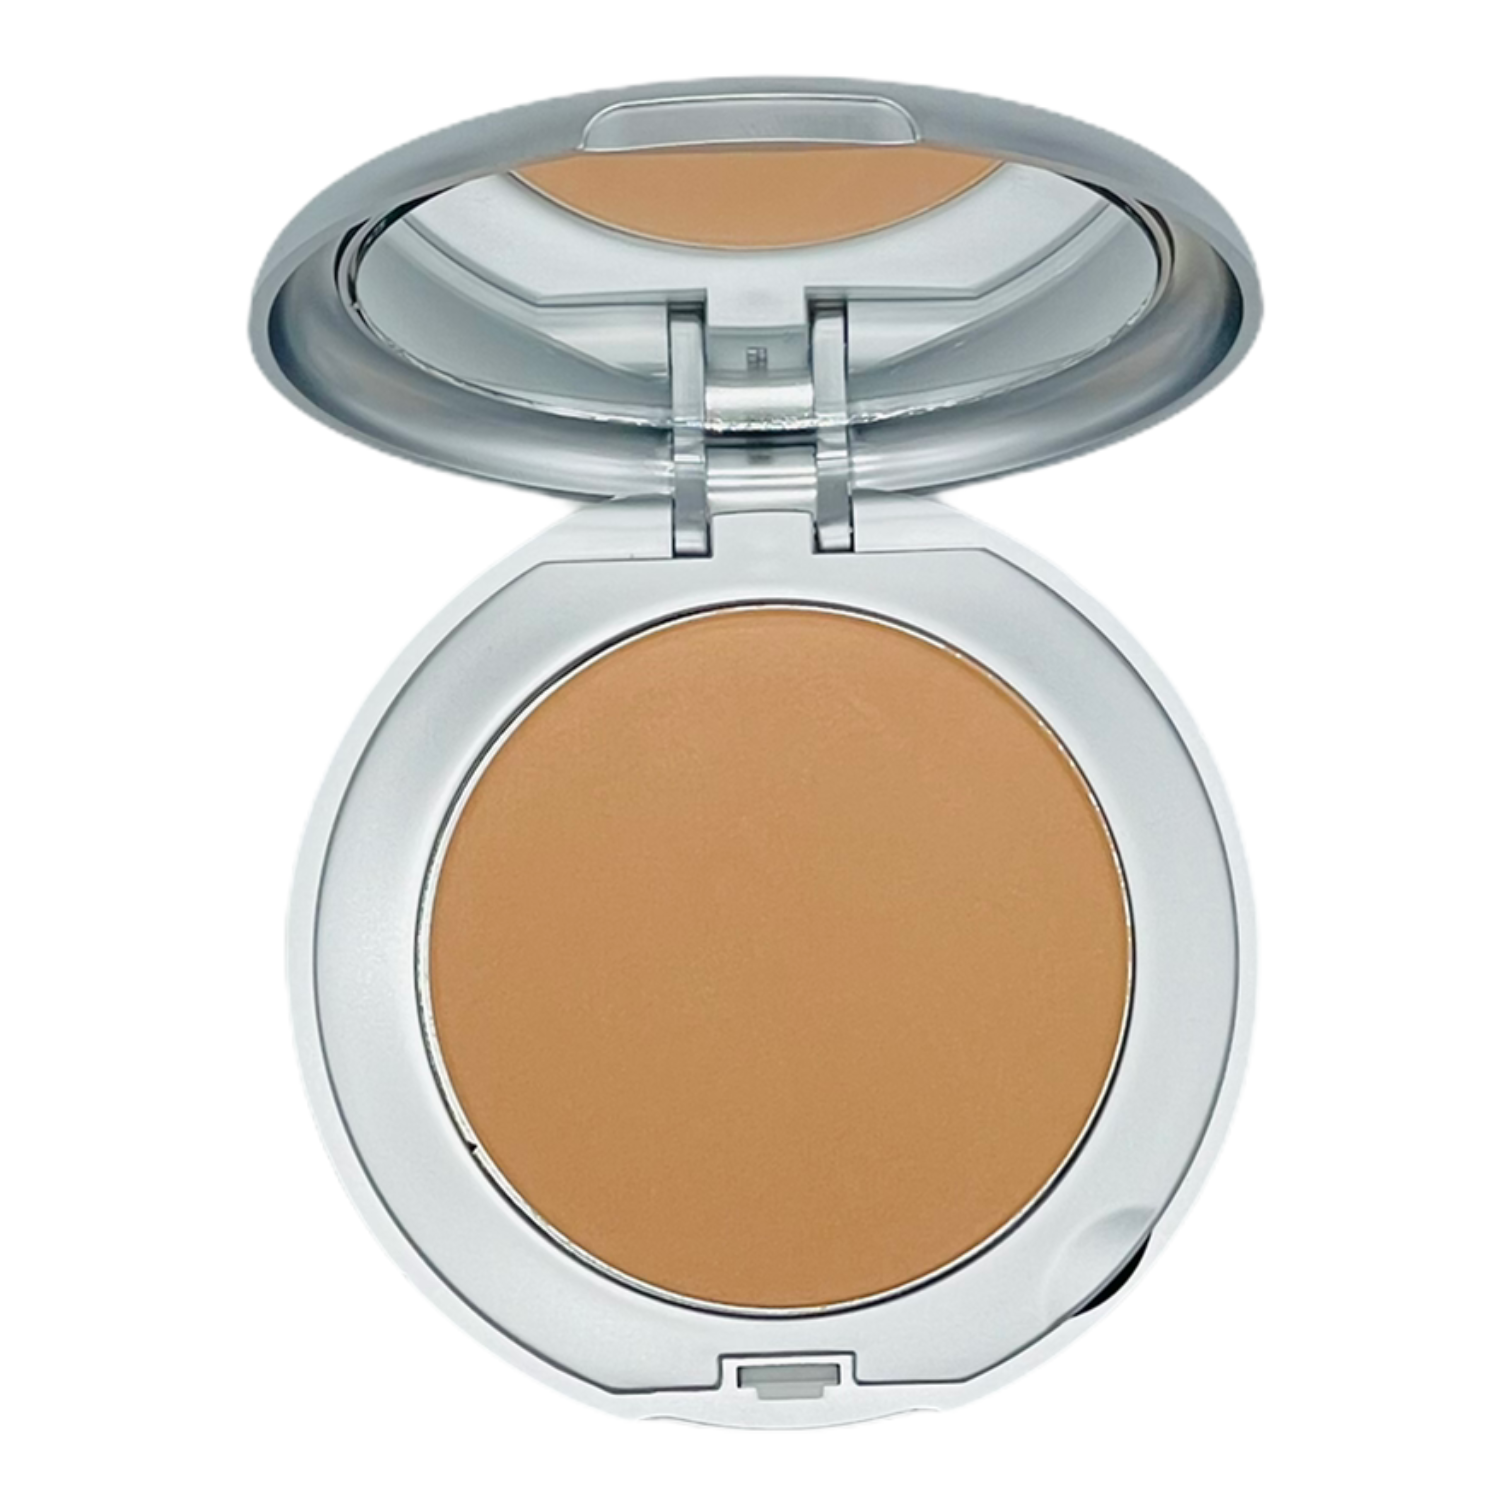 T. Le Clerc Powdery Compact Foundation